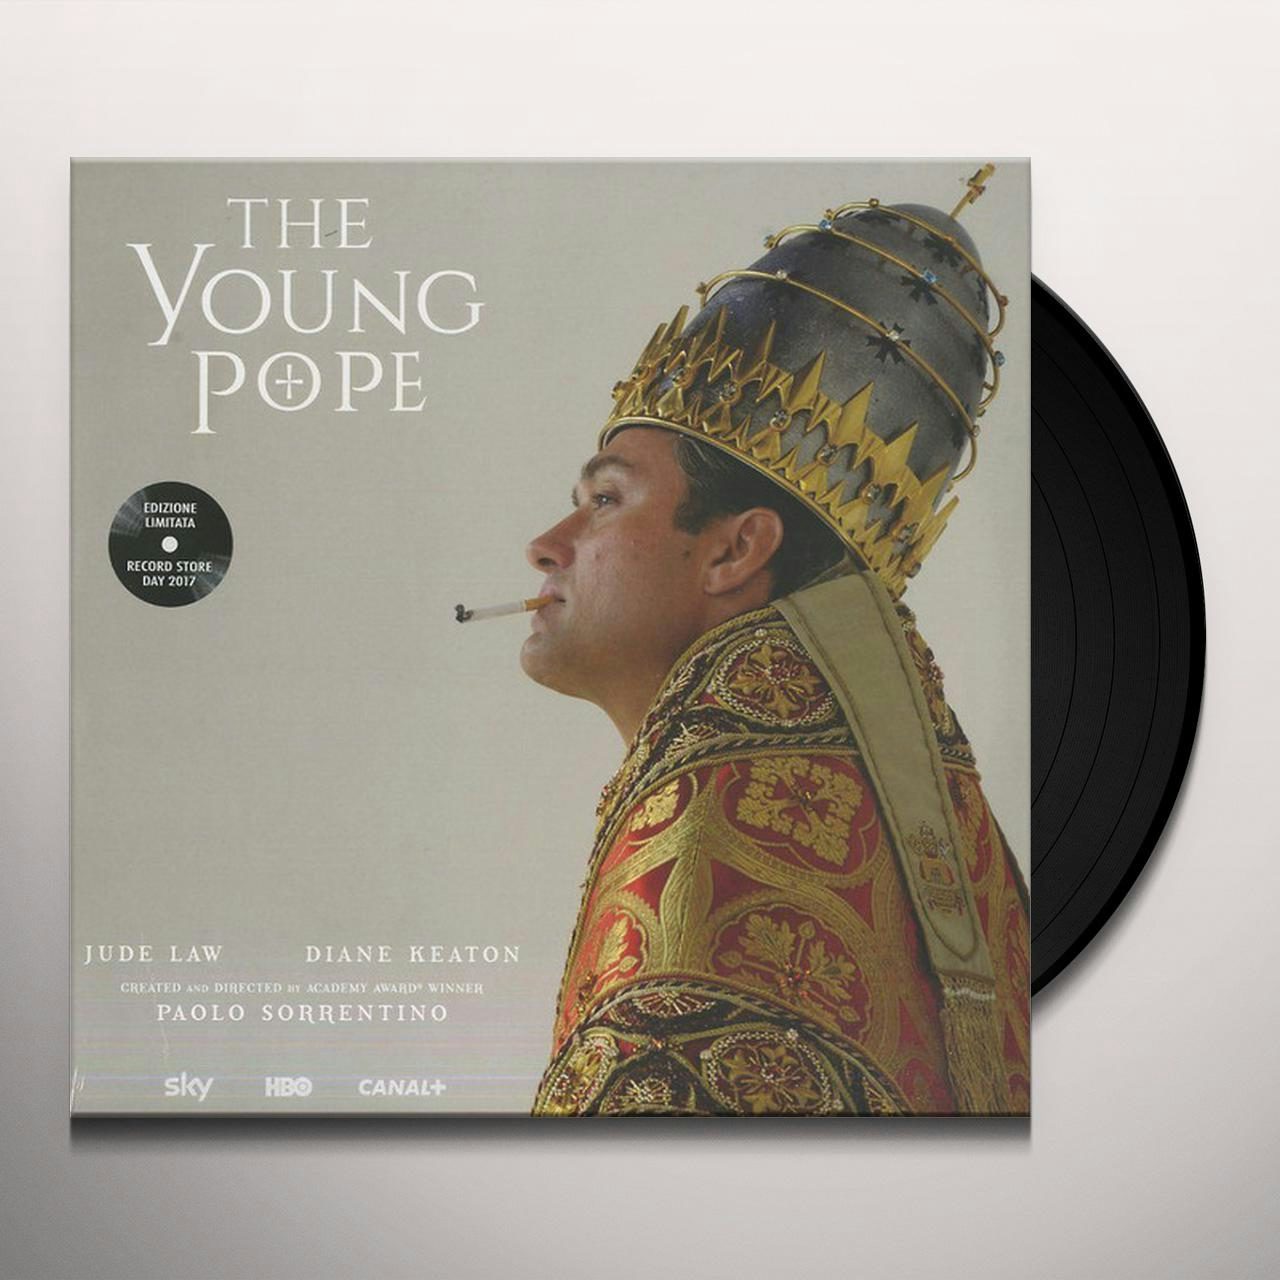 The Young Pope OST